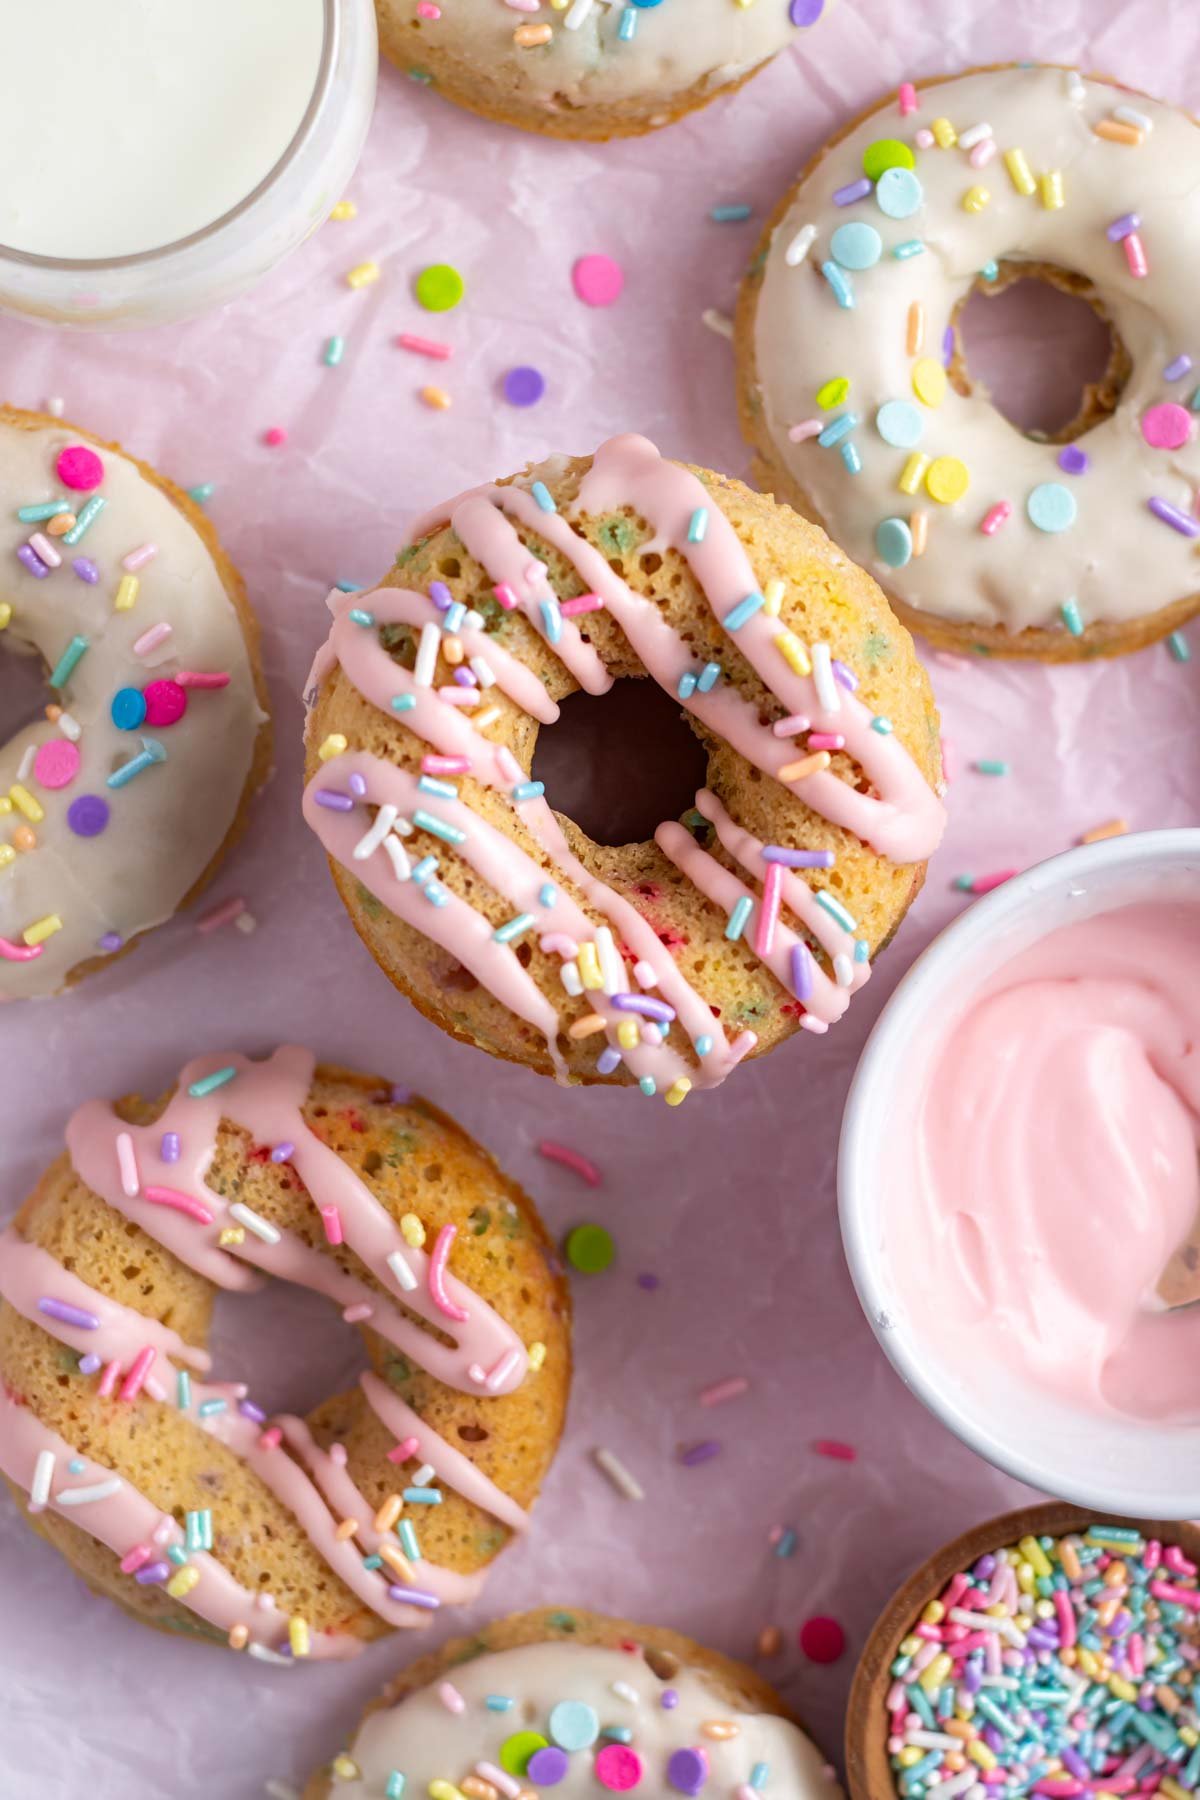 pink drizzle and white glaze on donuts with milk